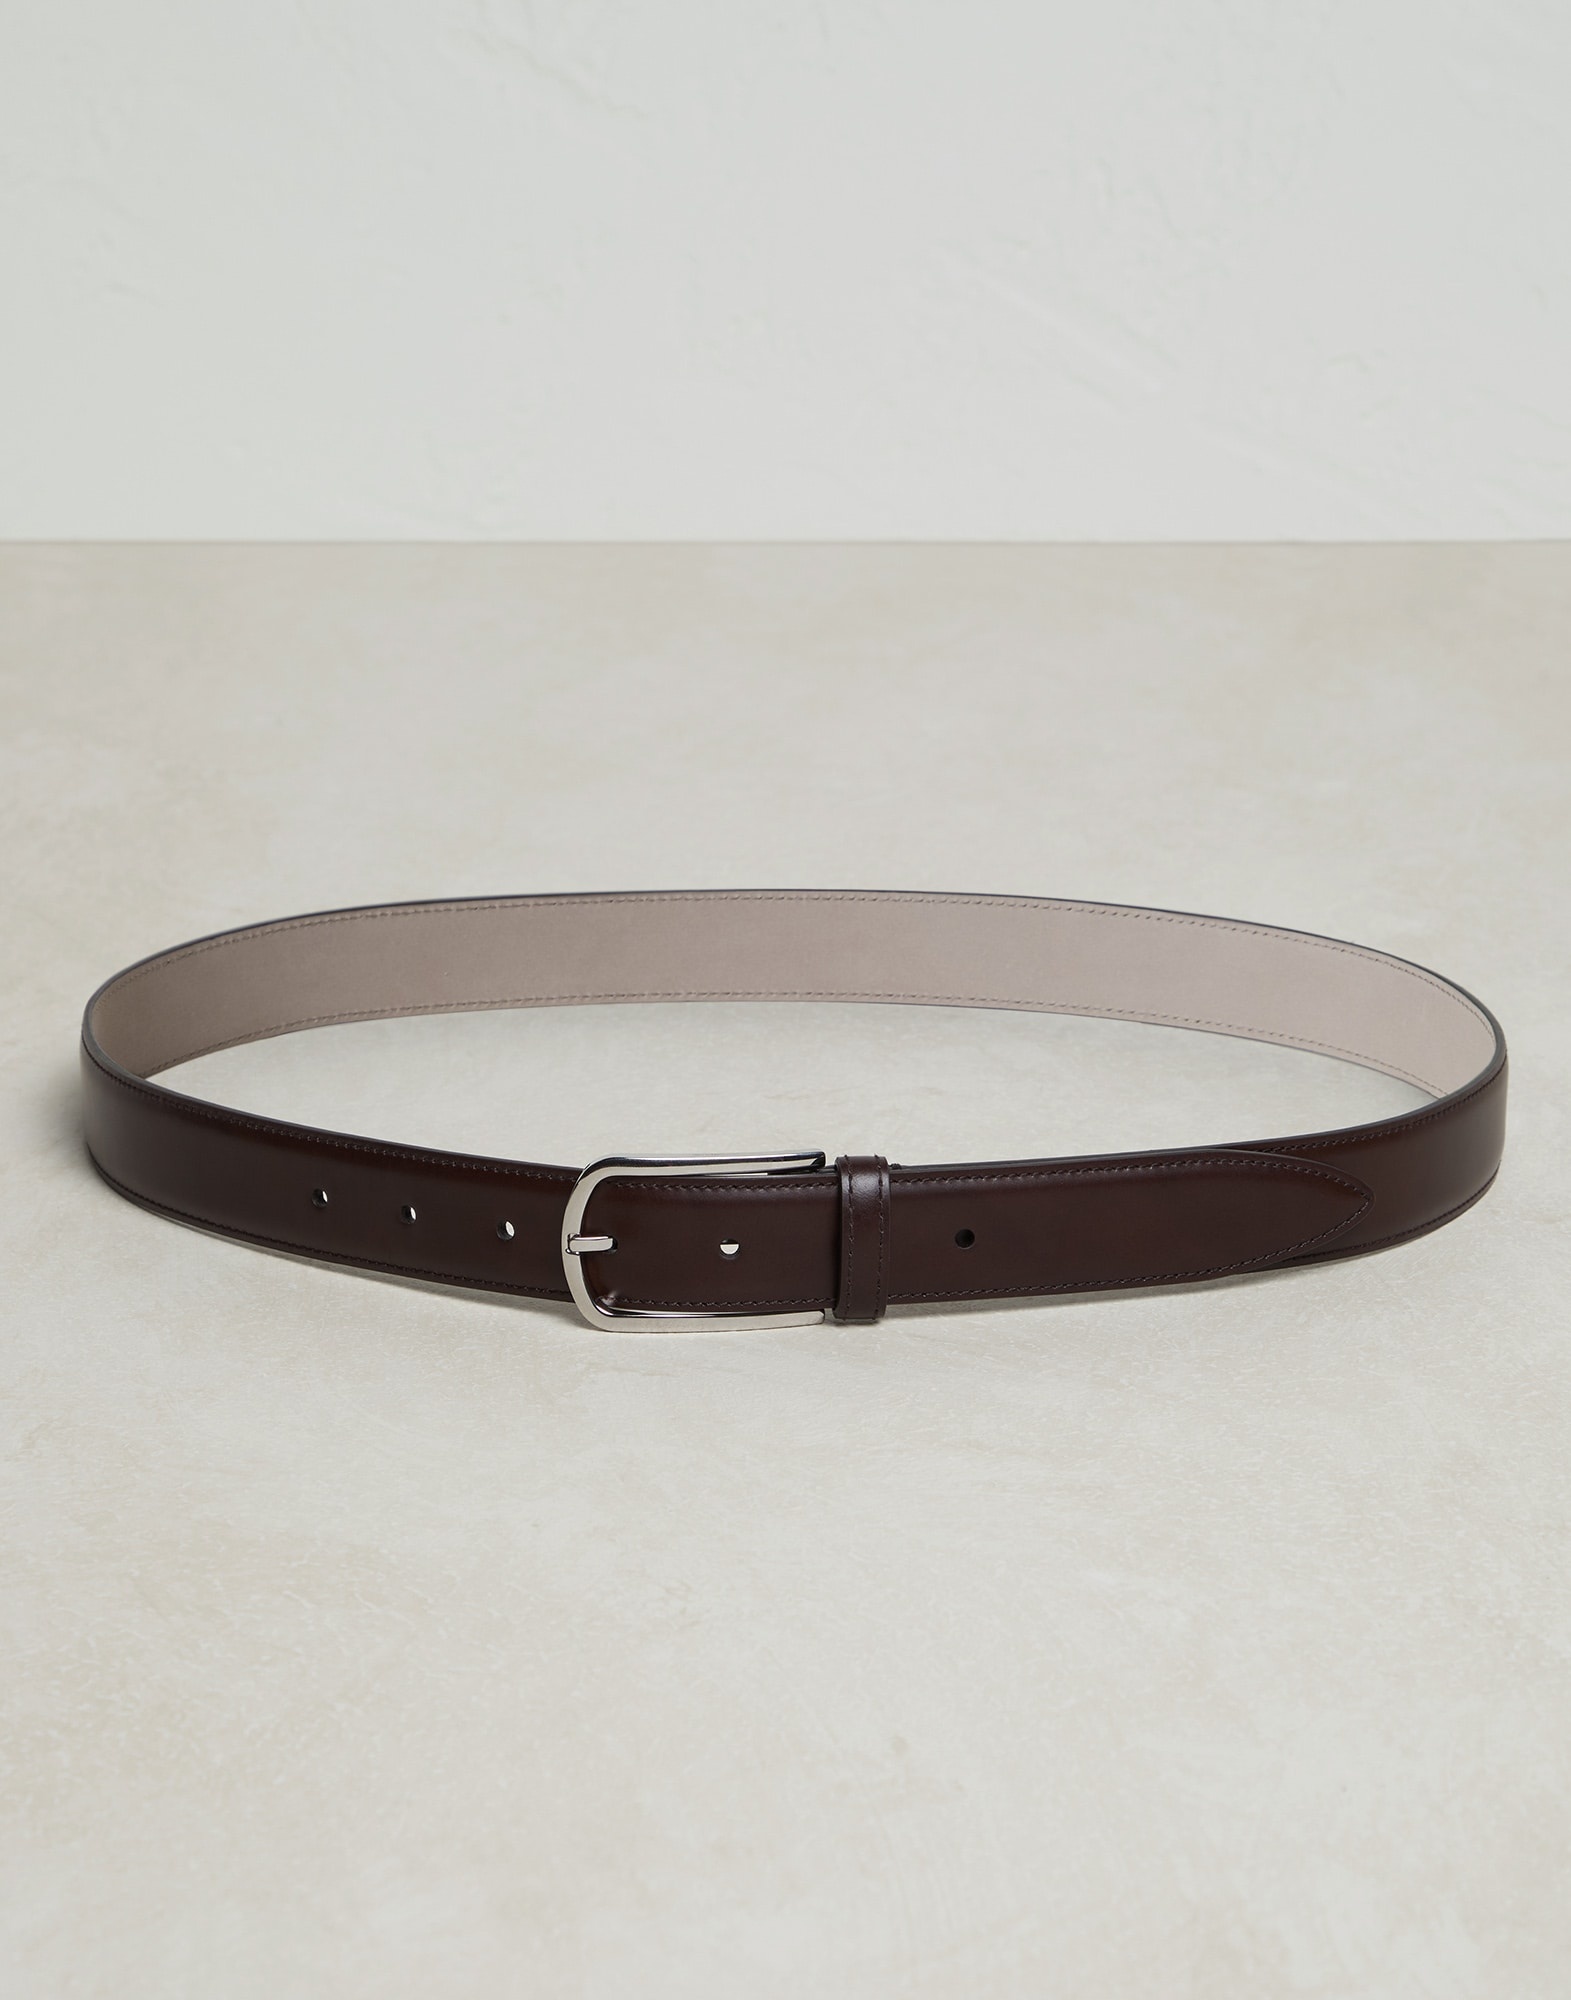 Calfskin belt with rounded buckle - 1